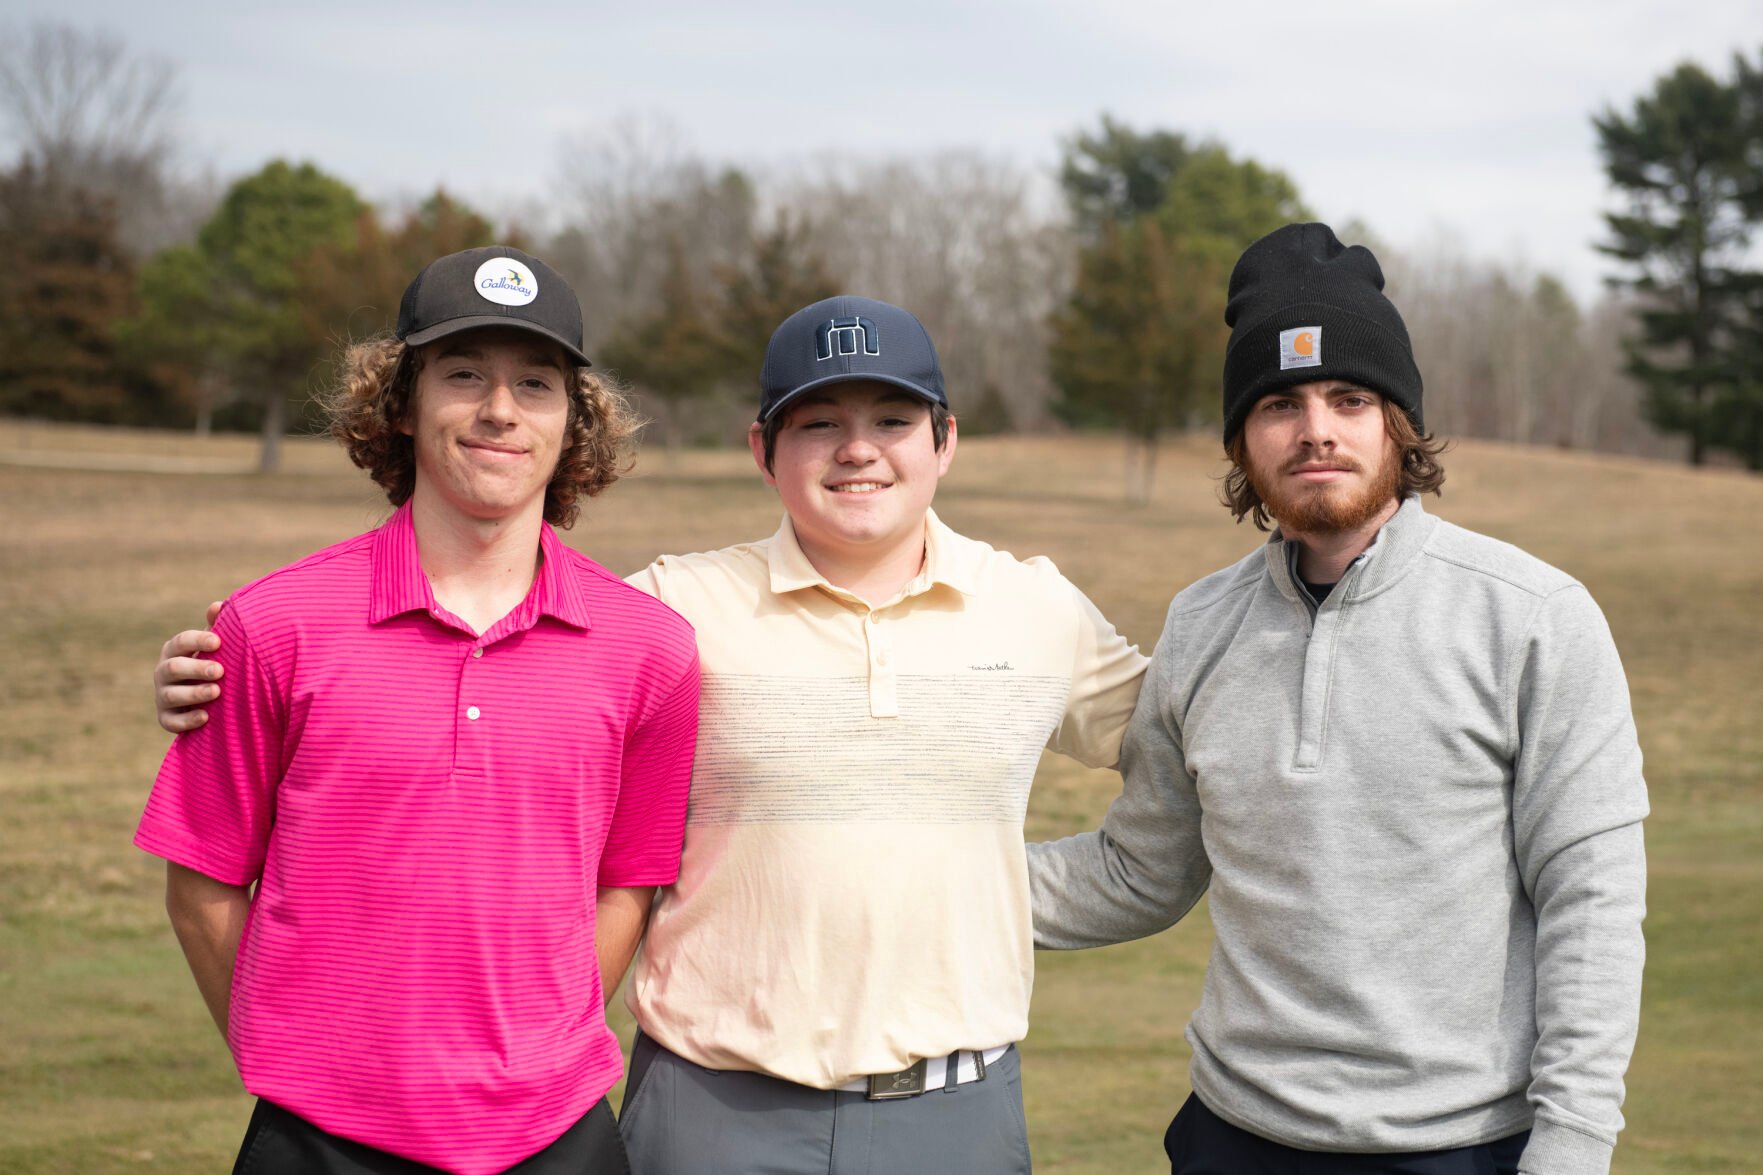 After undefeated season, Cedar Creek golf looks to shine again in 2023